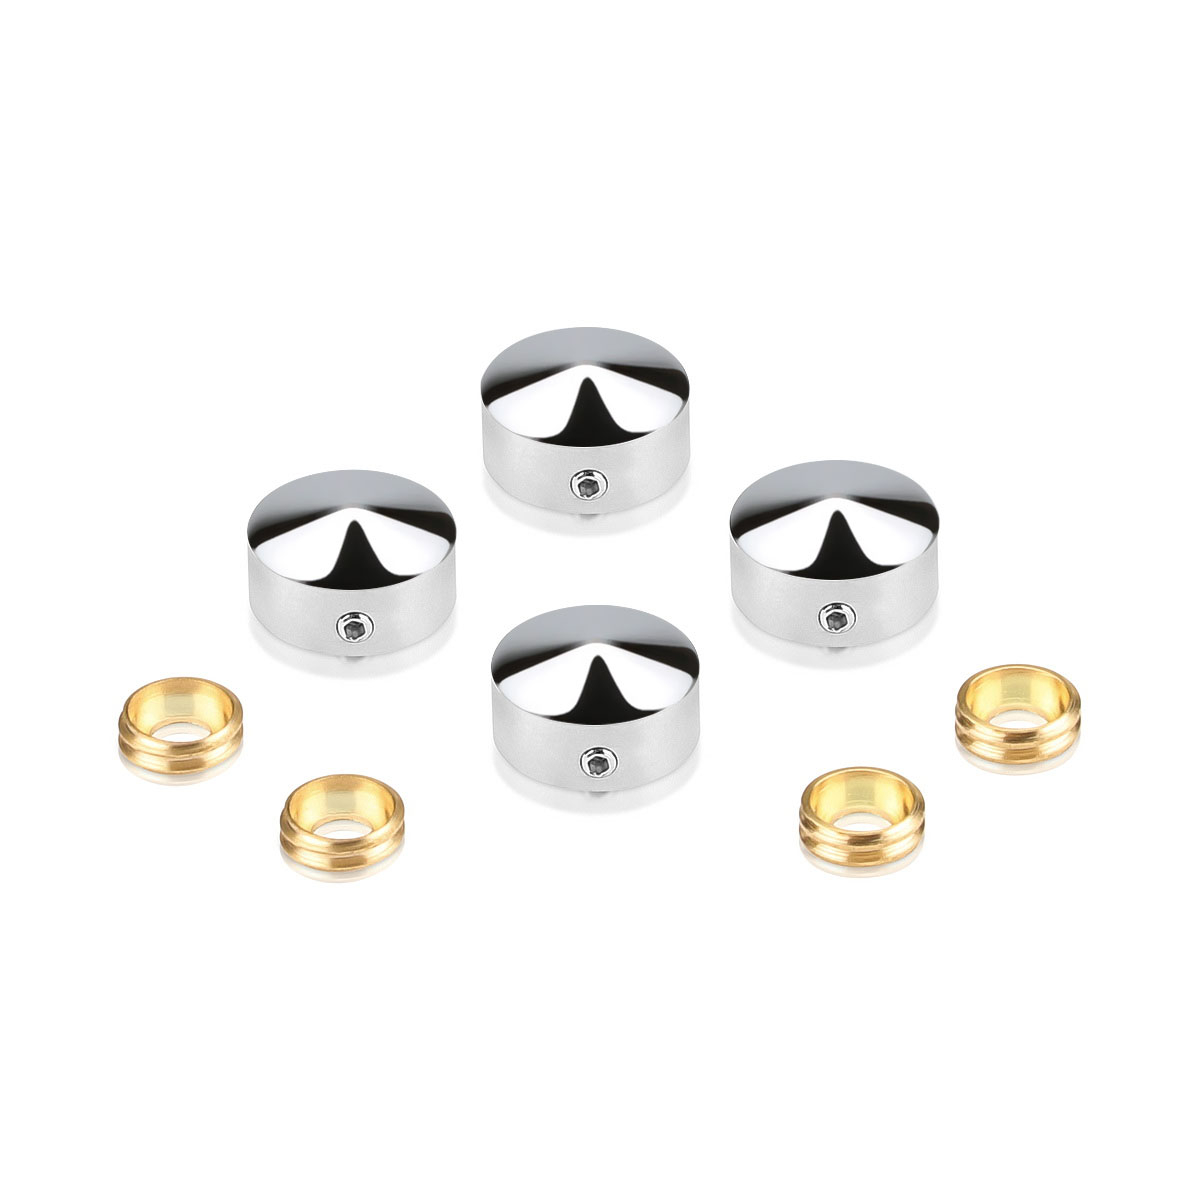 Set of 4 Conical Locking Screw Cover Diameter 5/8'', Polished Stainless Steel Finish (Indoor or Outdoor)